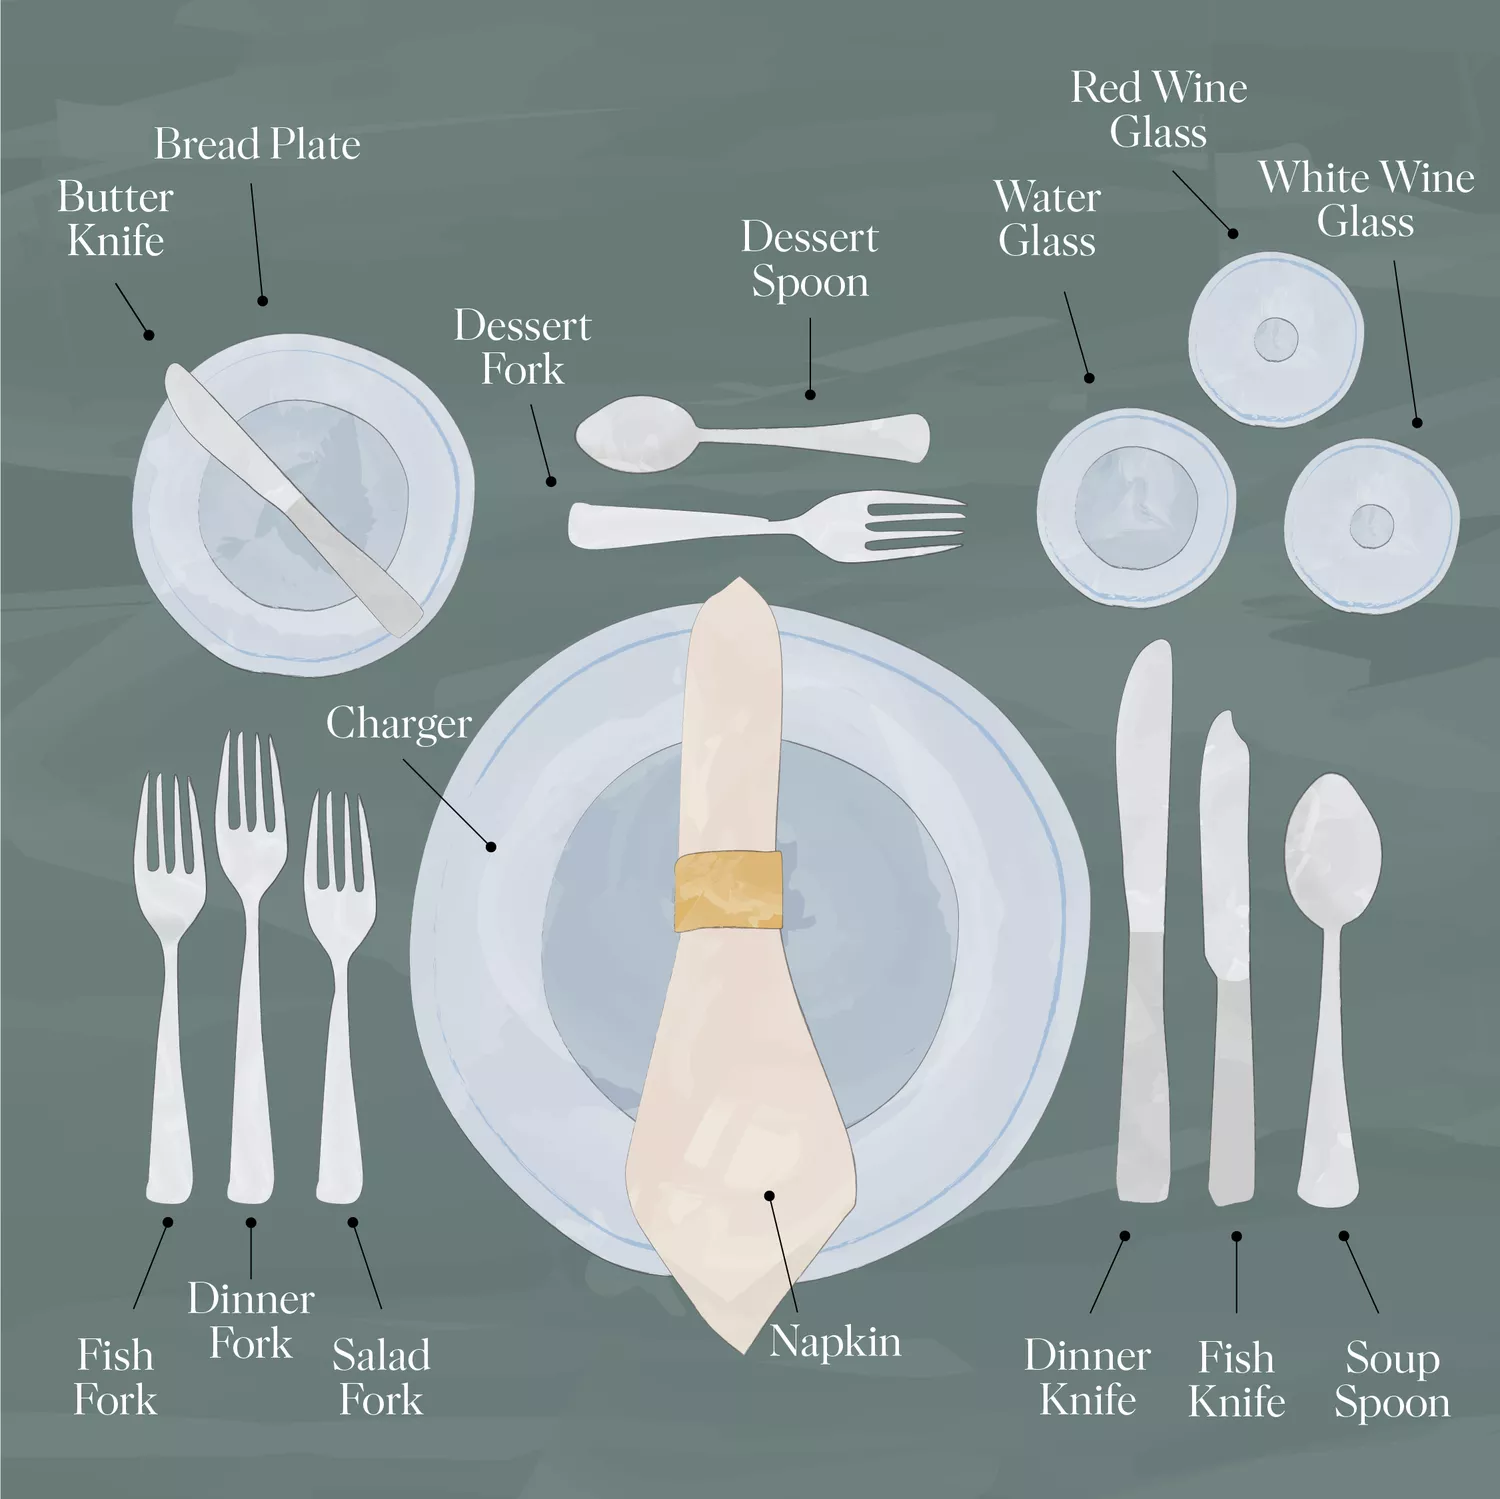 Where to Place Your Napkin in a Formal Dining Place Setting